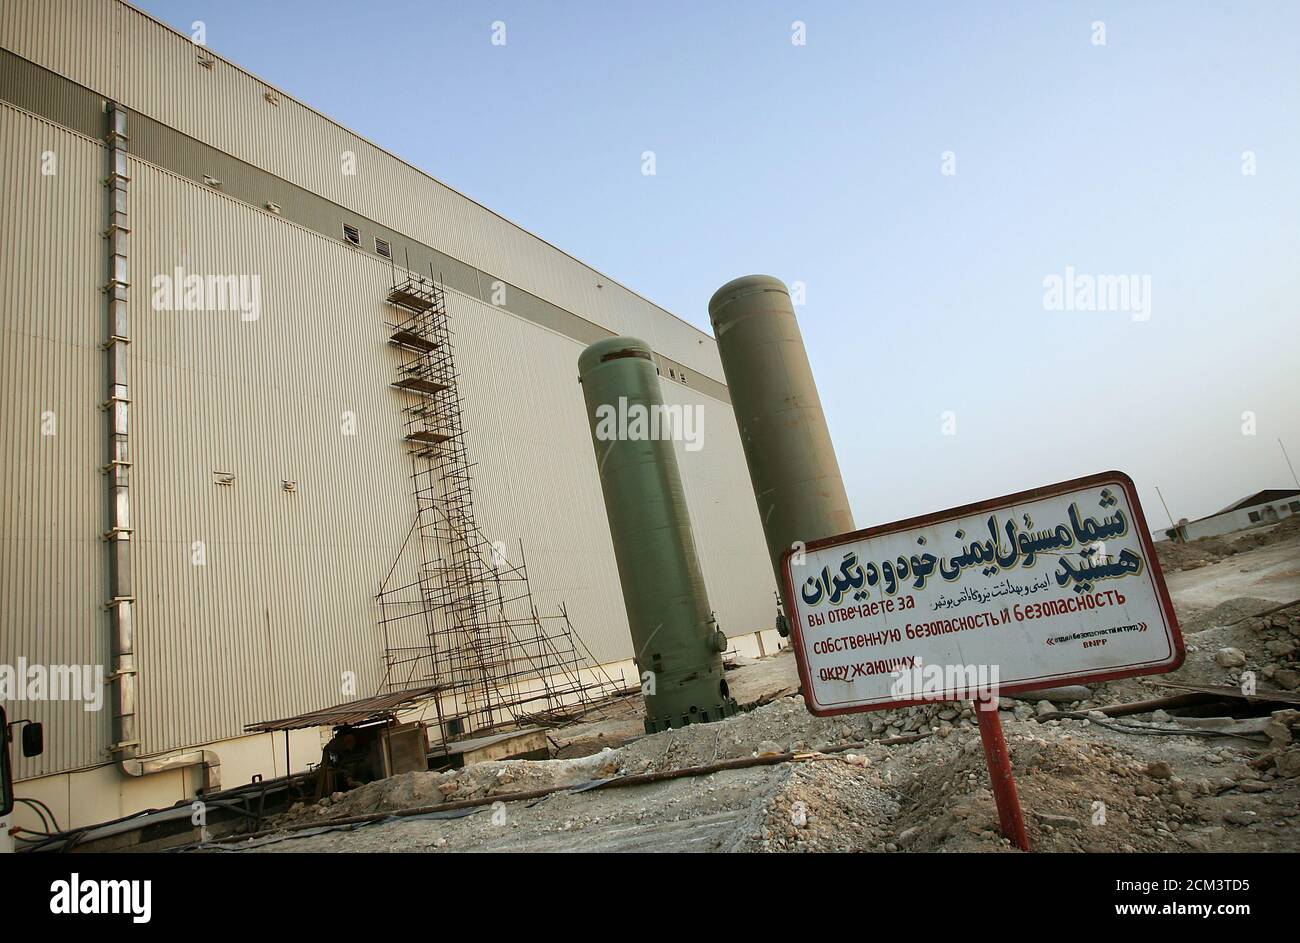 General view of the nuclear plant in the southwestern Iranian city of Bushehr June 22, 2005. Russian fuel for Iran's first nuclear power reactor, part of a programme Washington fears may be used to make bombs, will be delivered within months, a senior Iranian atomic official said on Wednesday. Russian welders and other workers working on the electricity turbine area and reactor building, which will be sealed off and operated automatically once fuel is introduced. REUTERS/Damir Sagolj  DS Stock Photo